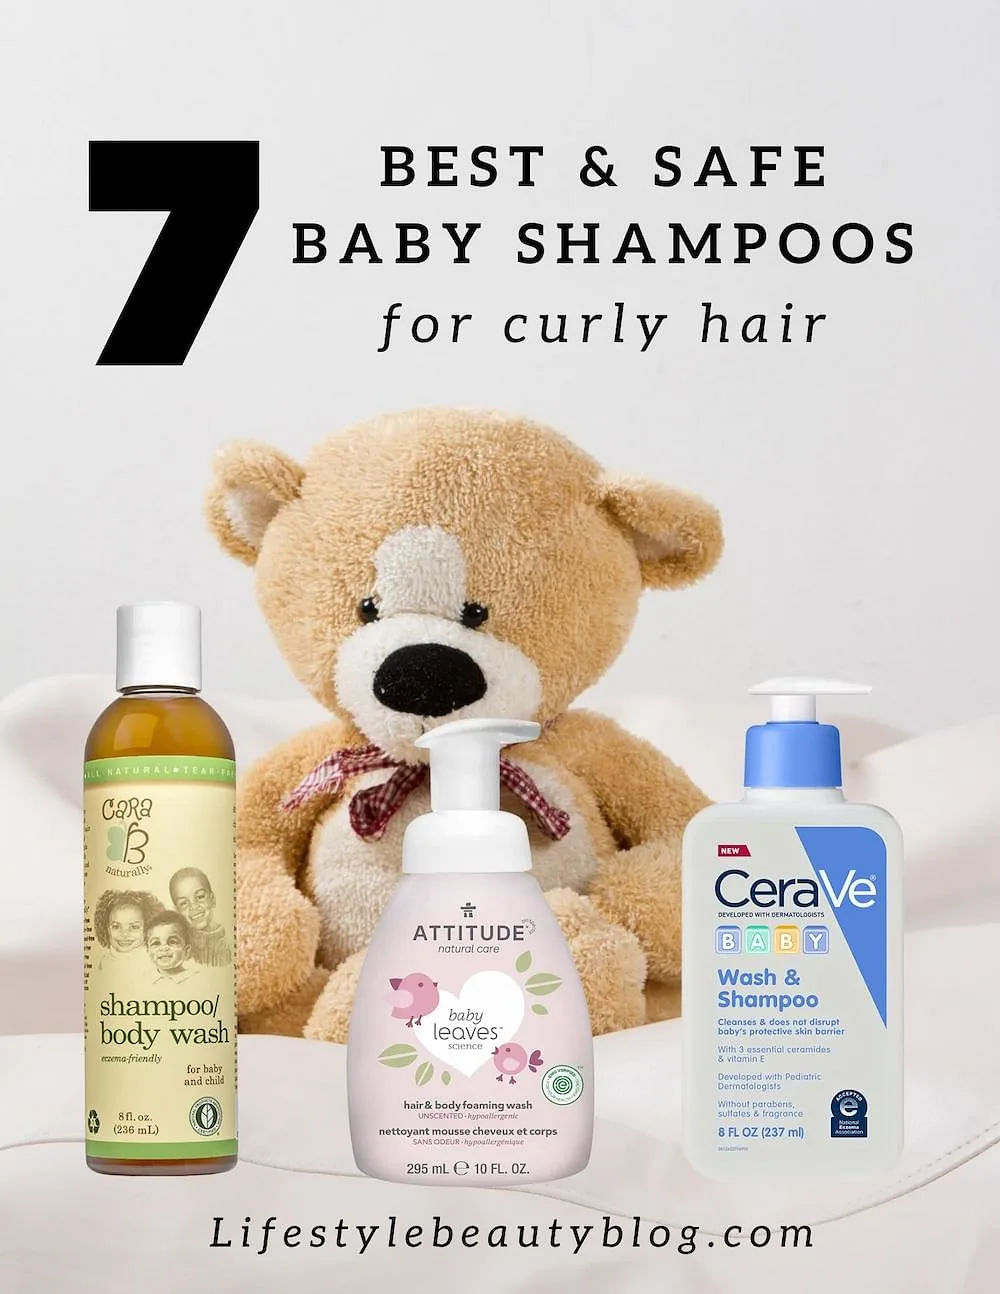 The 7 Safe and Best Shampoos for Curly Hair Kids